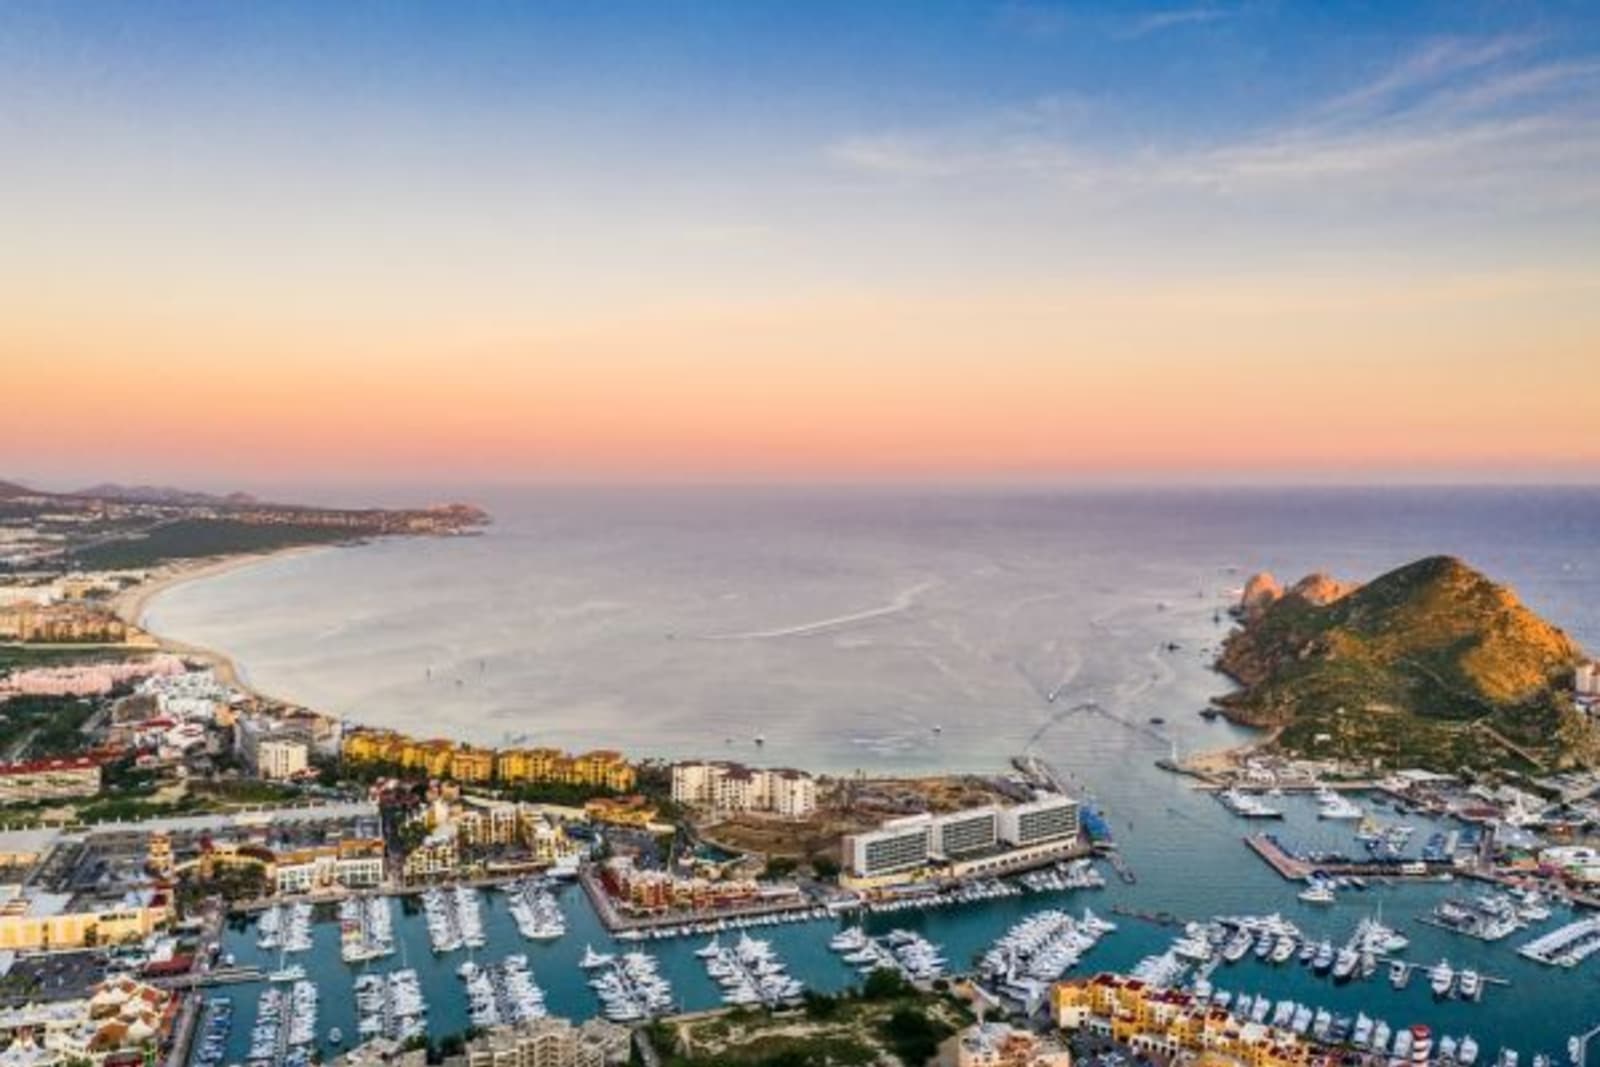 Aerial view of sunset over the town of Marina